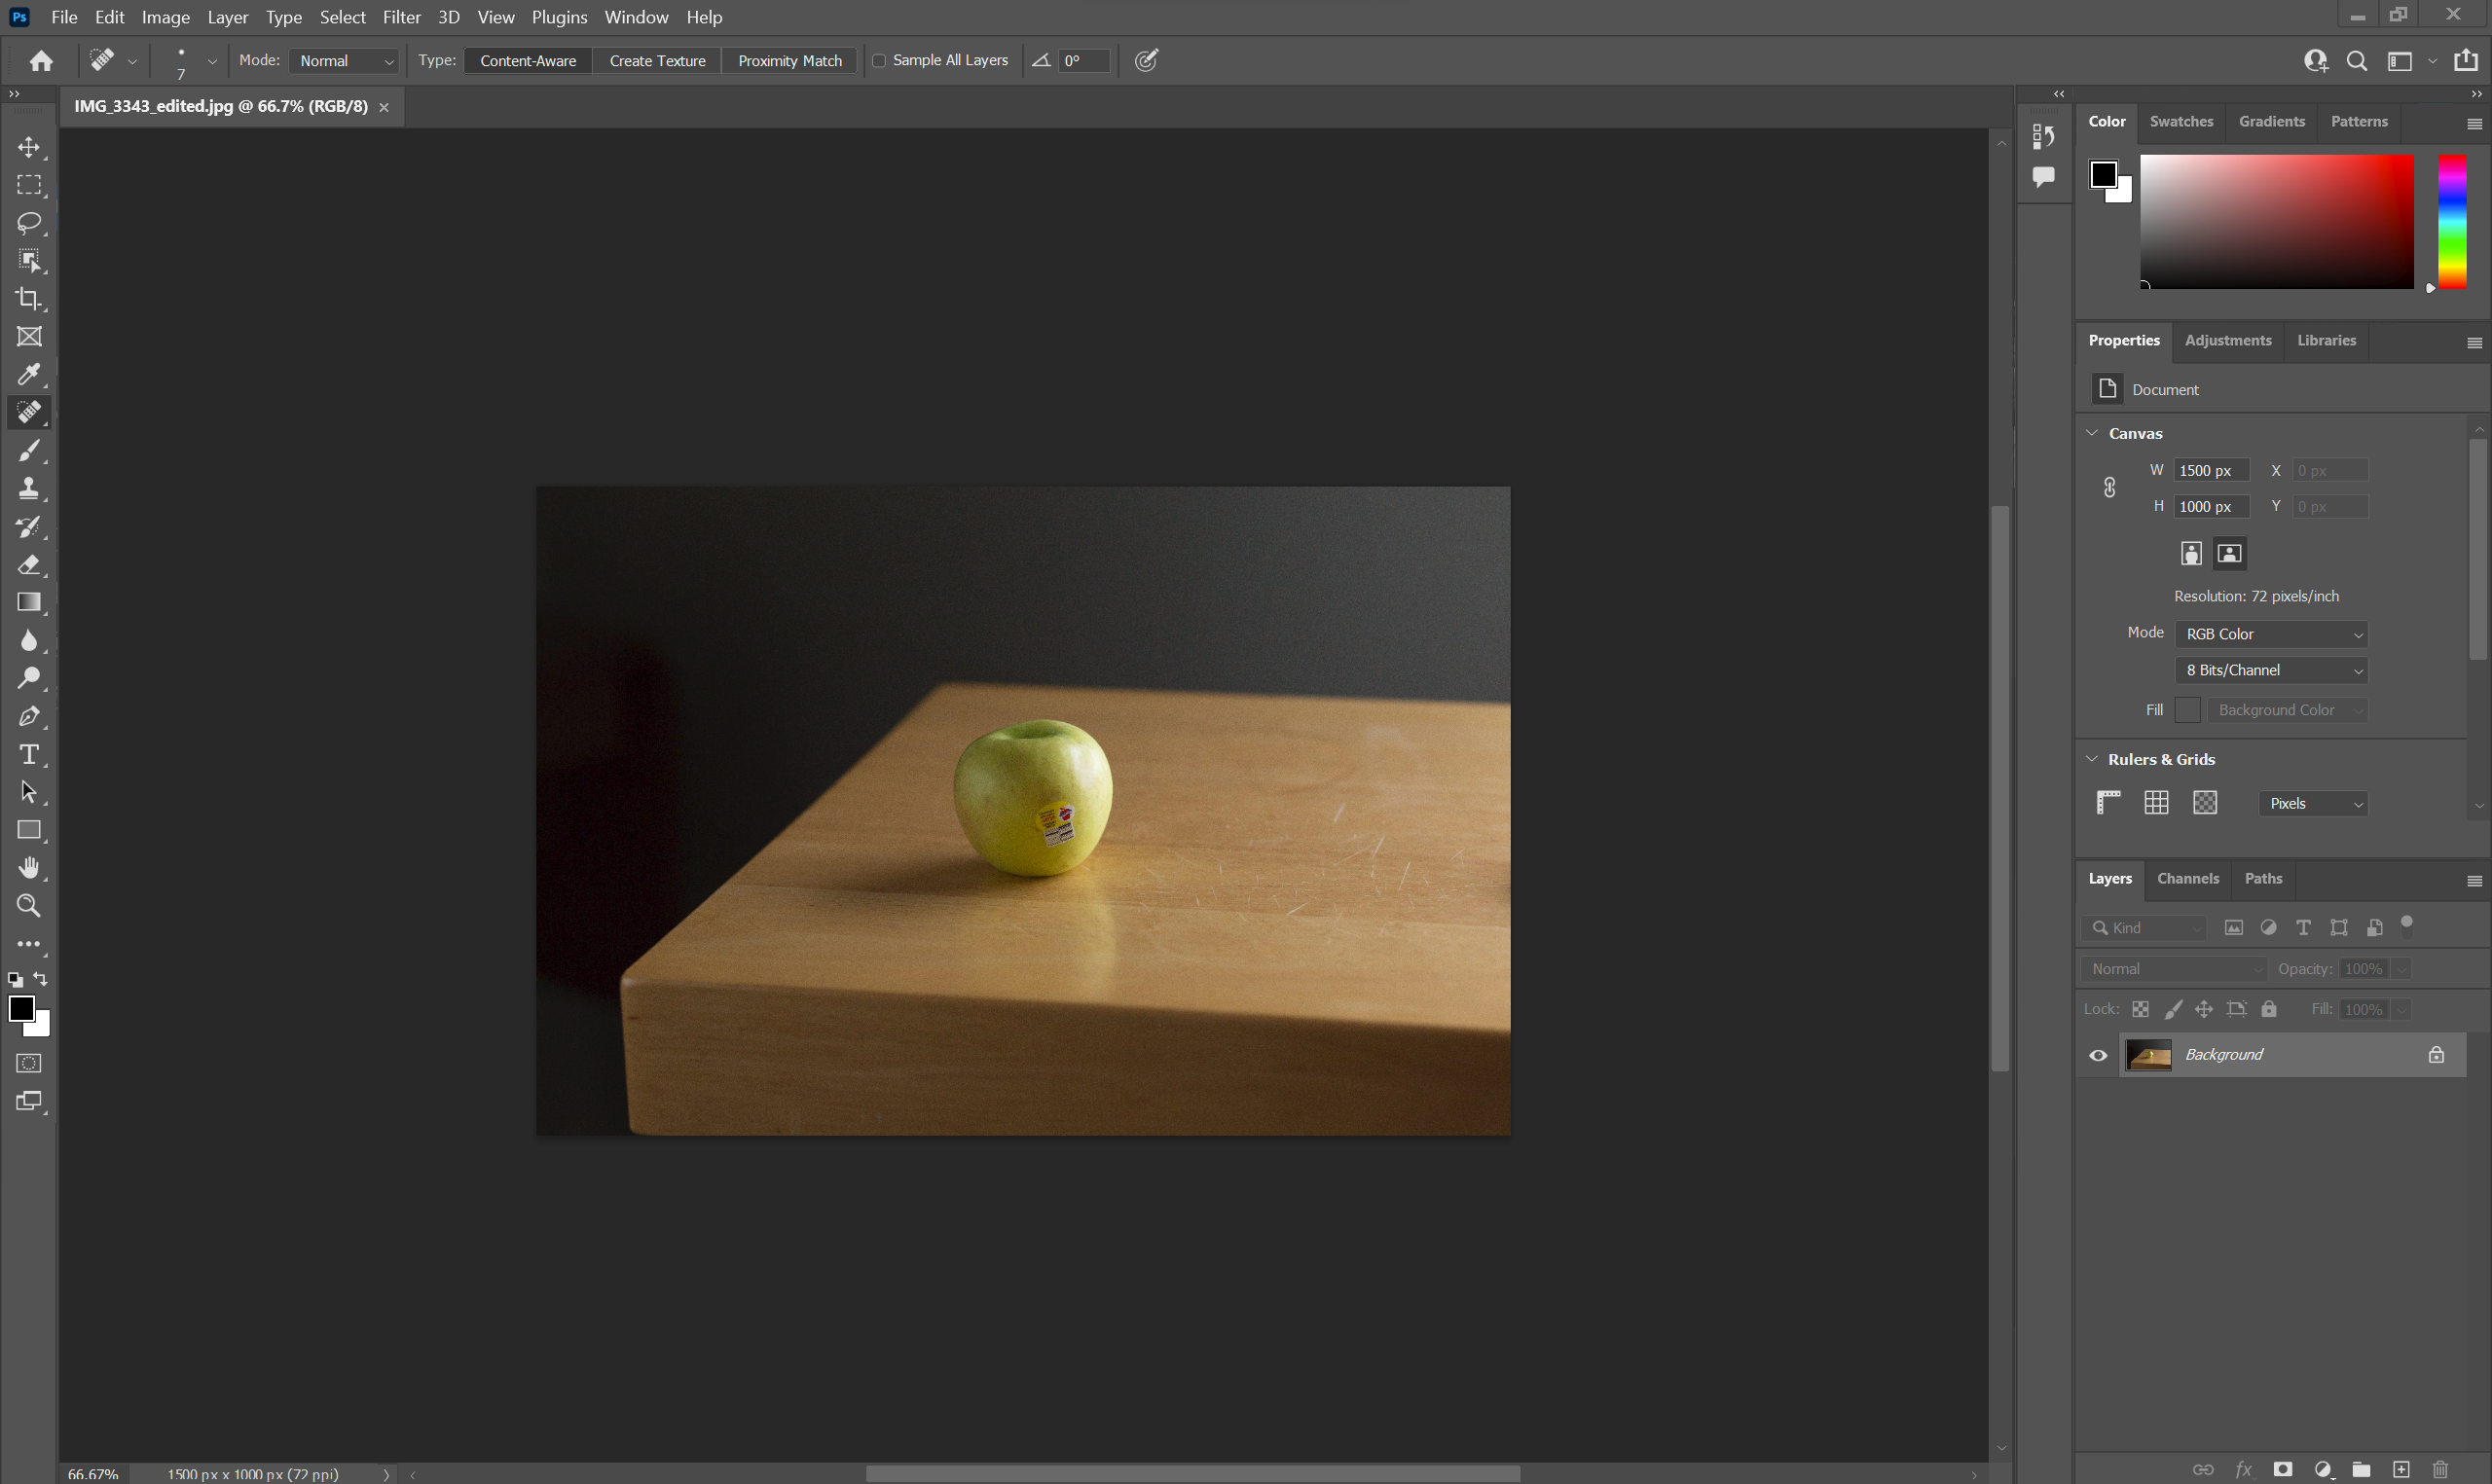 A picture of an apple, opened up in Photoshop.